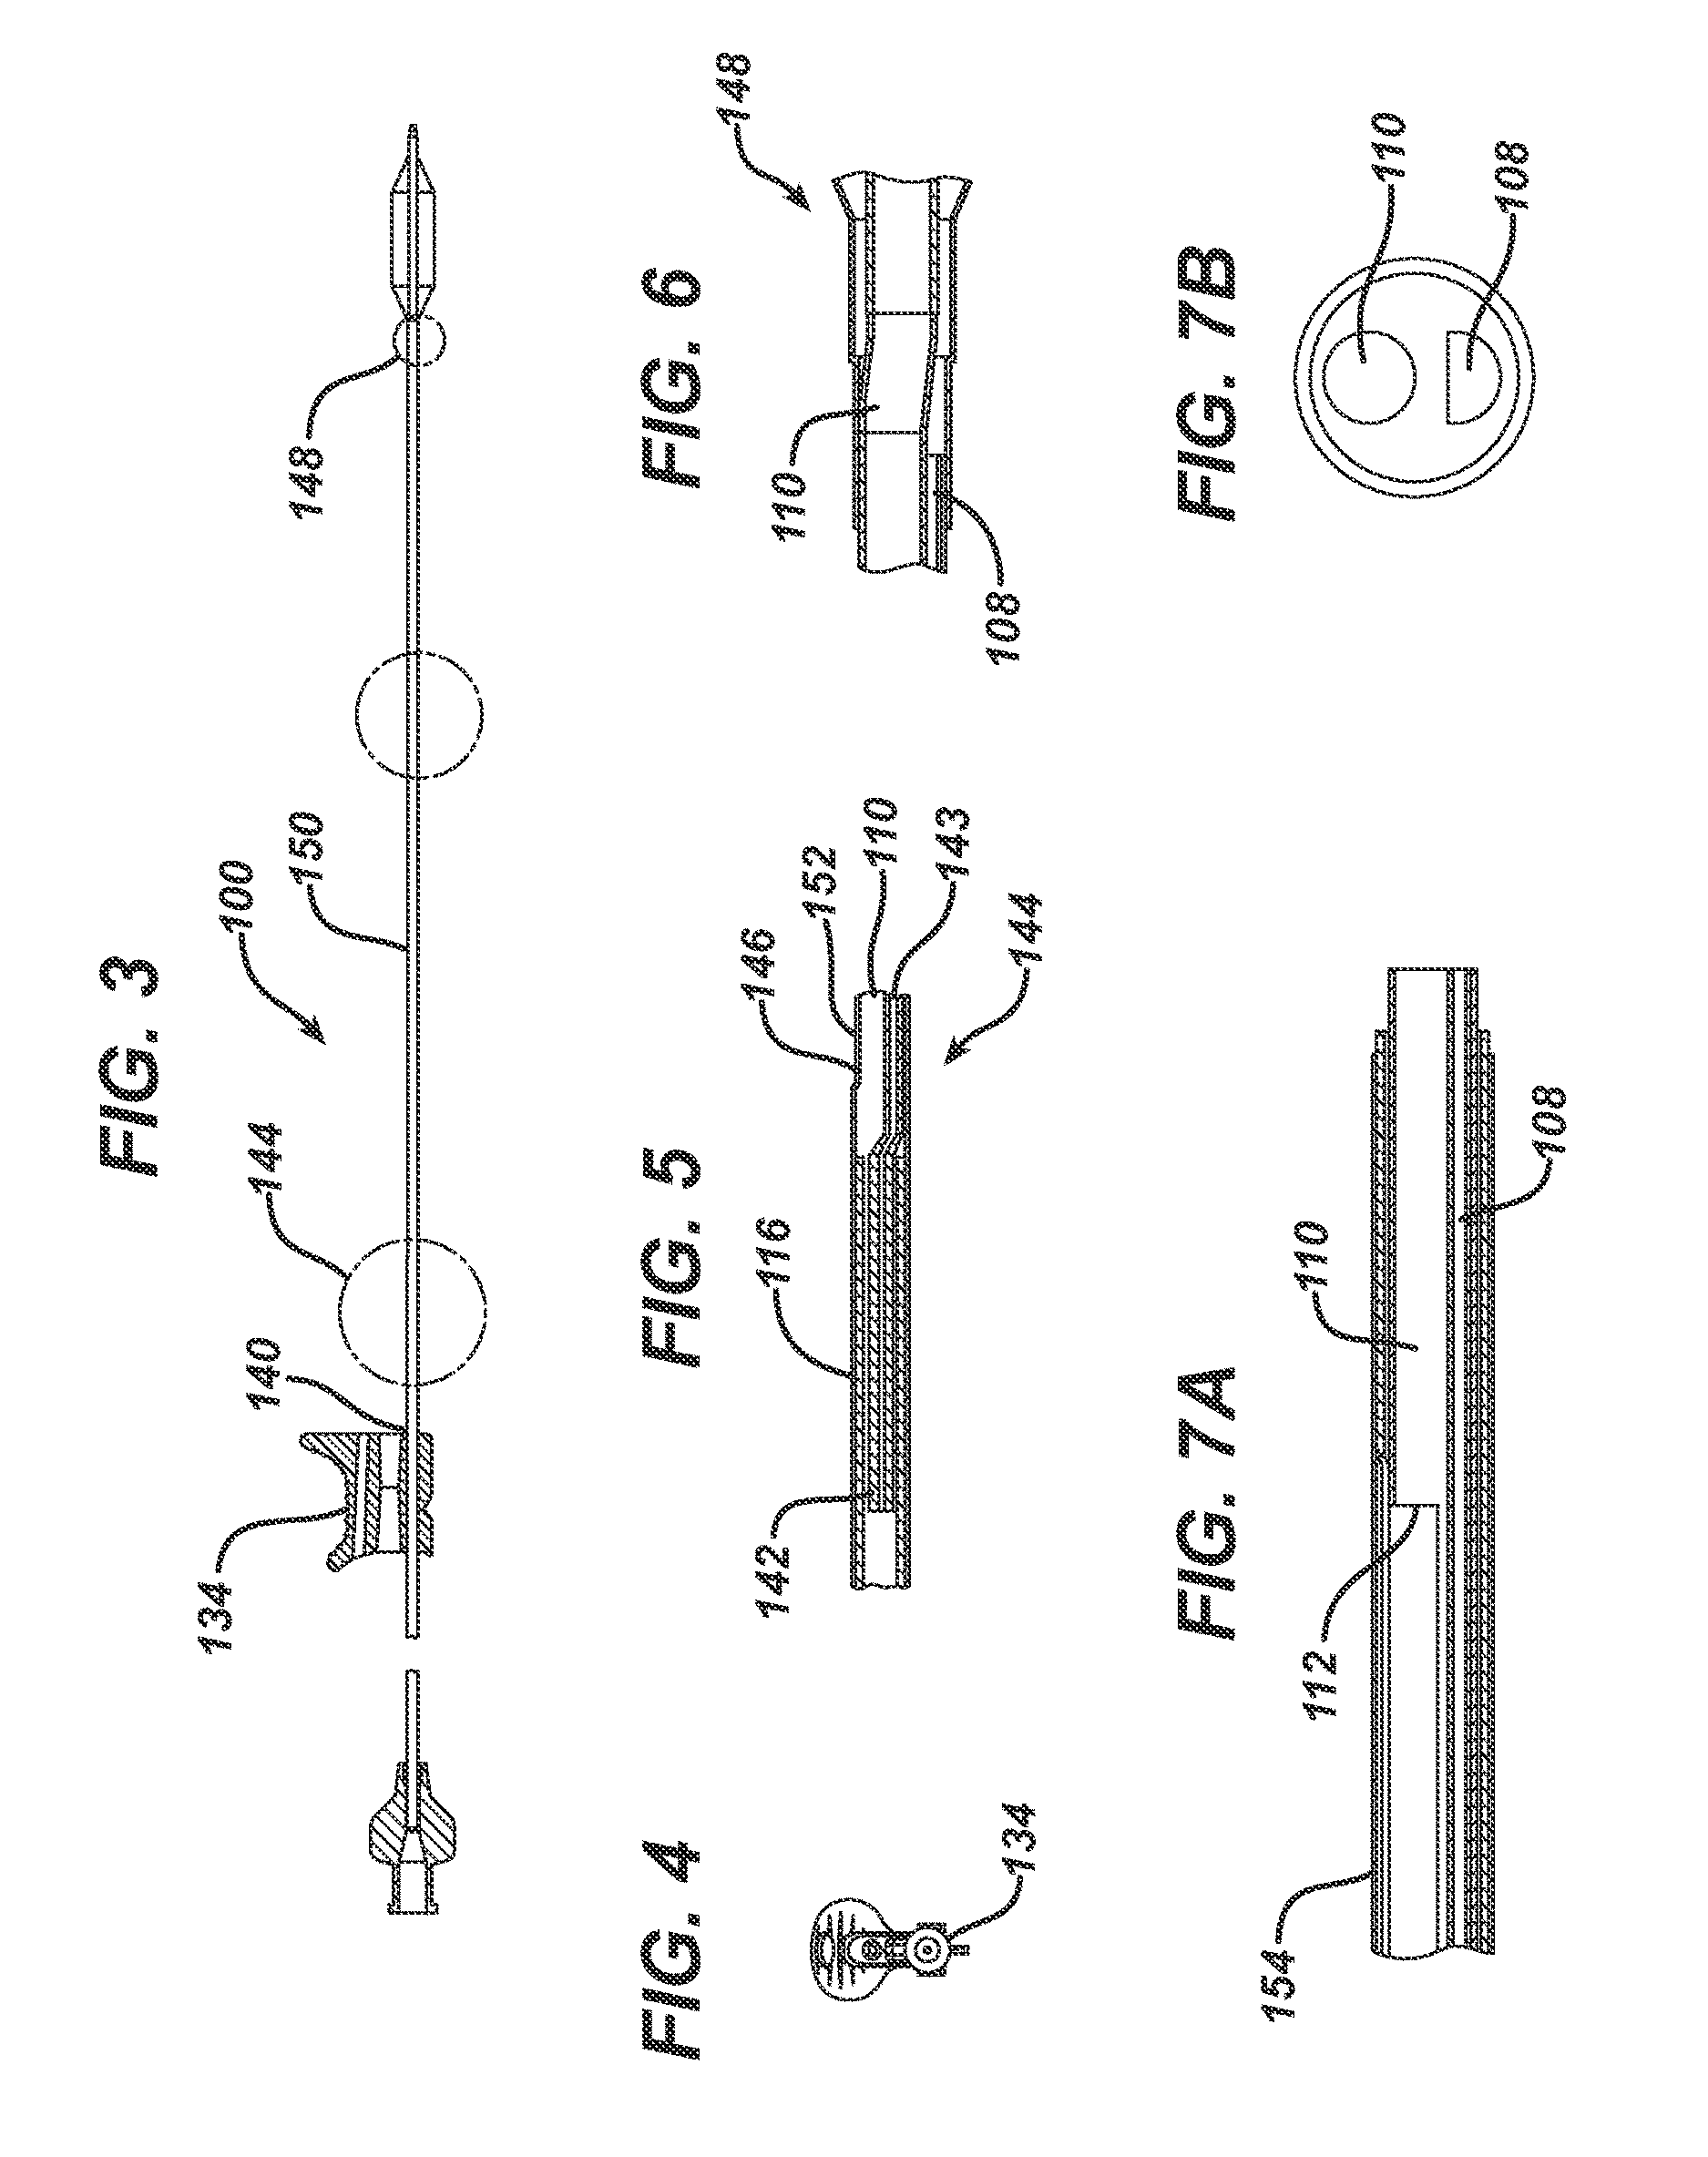 Balloon dilation catheter system for treatment and irrigation of the sinuses